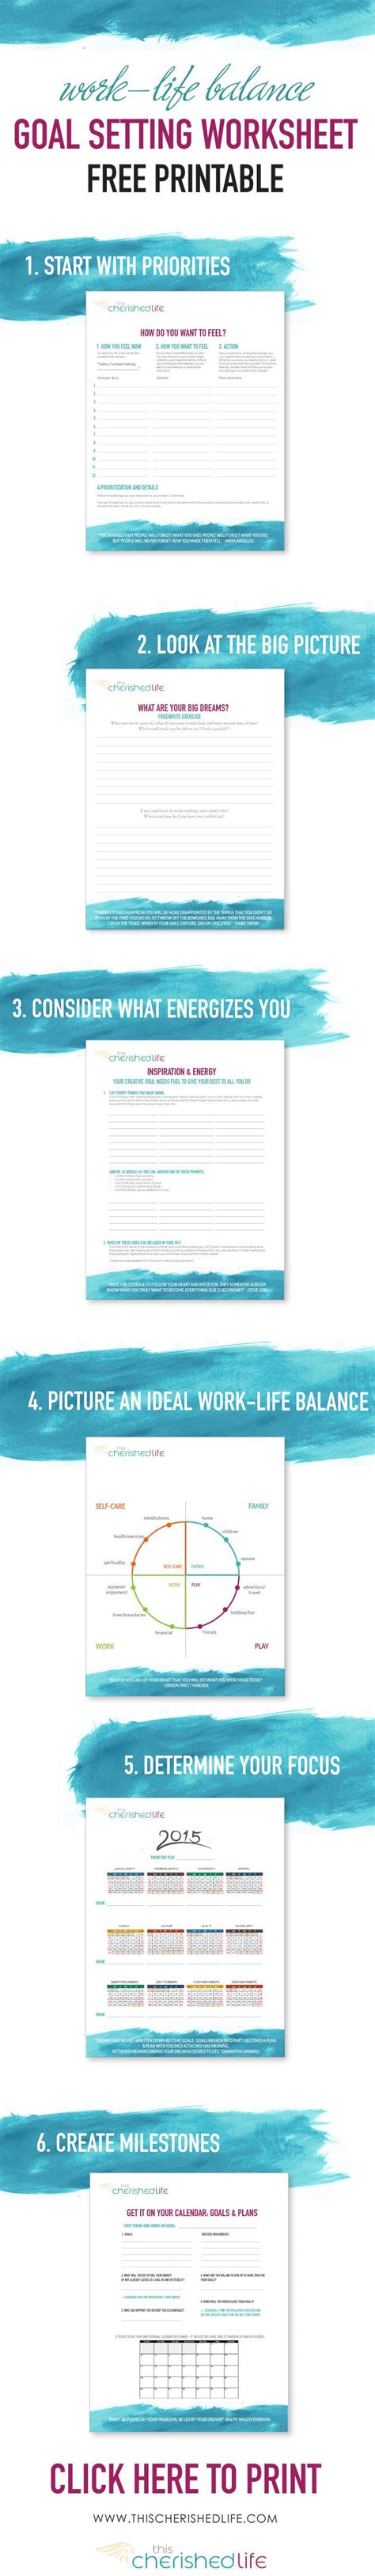 200 Best Images About Goal Setting Printables And Motivation